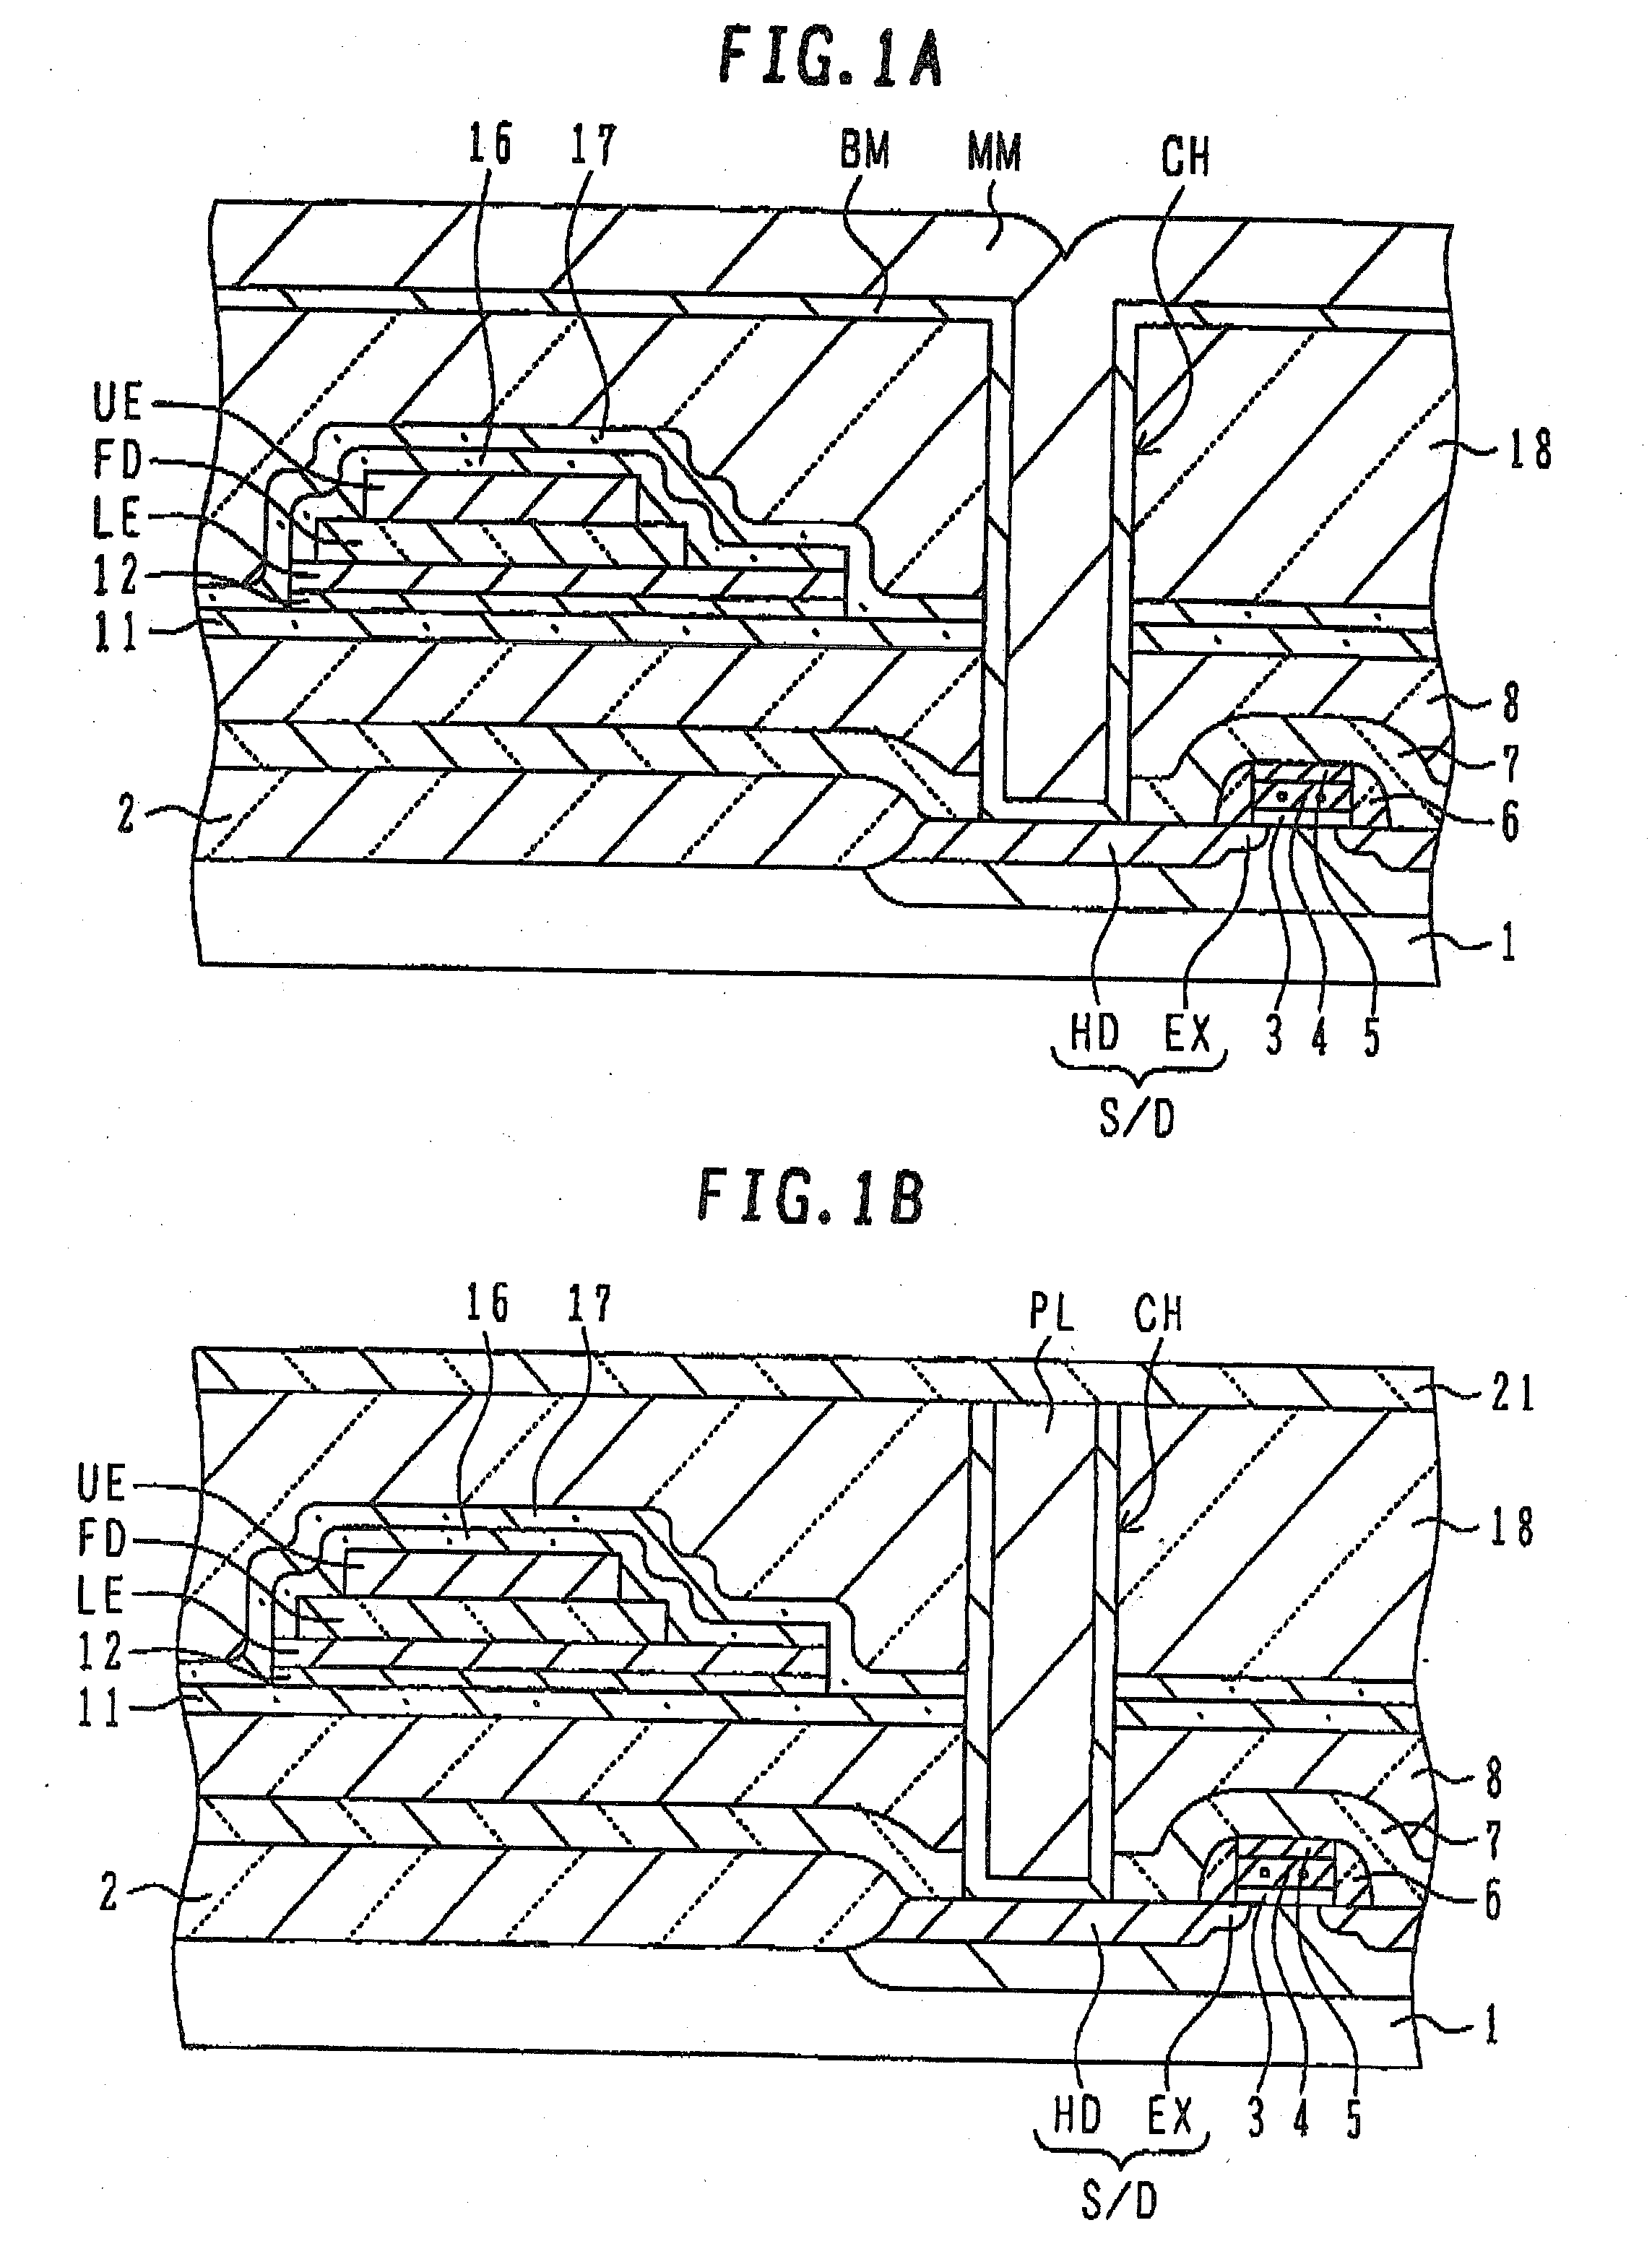 Semiconductor device with ferro-electric capacitor